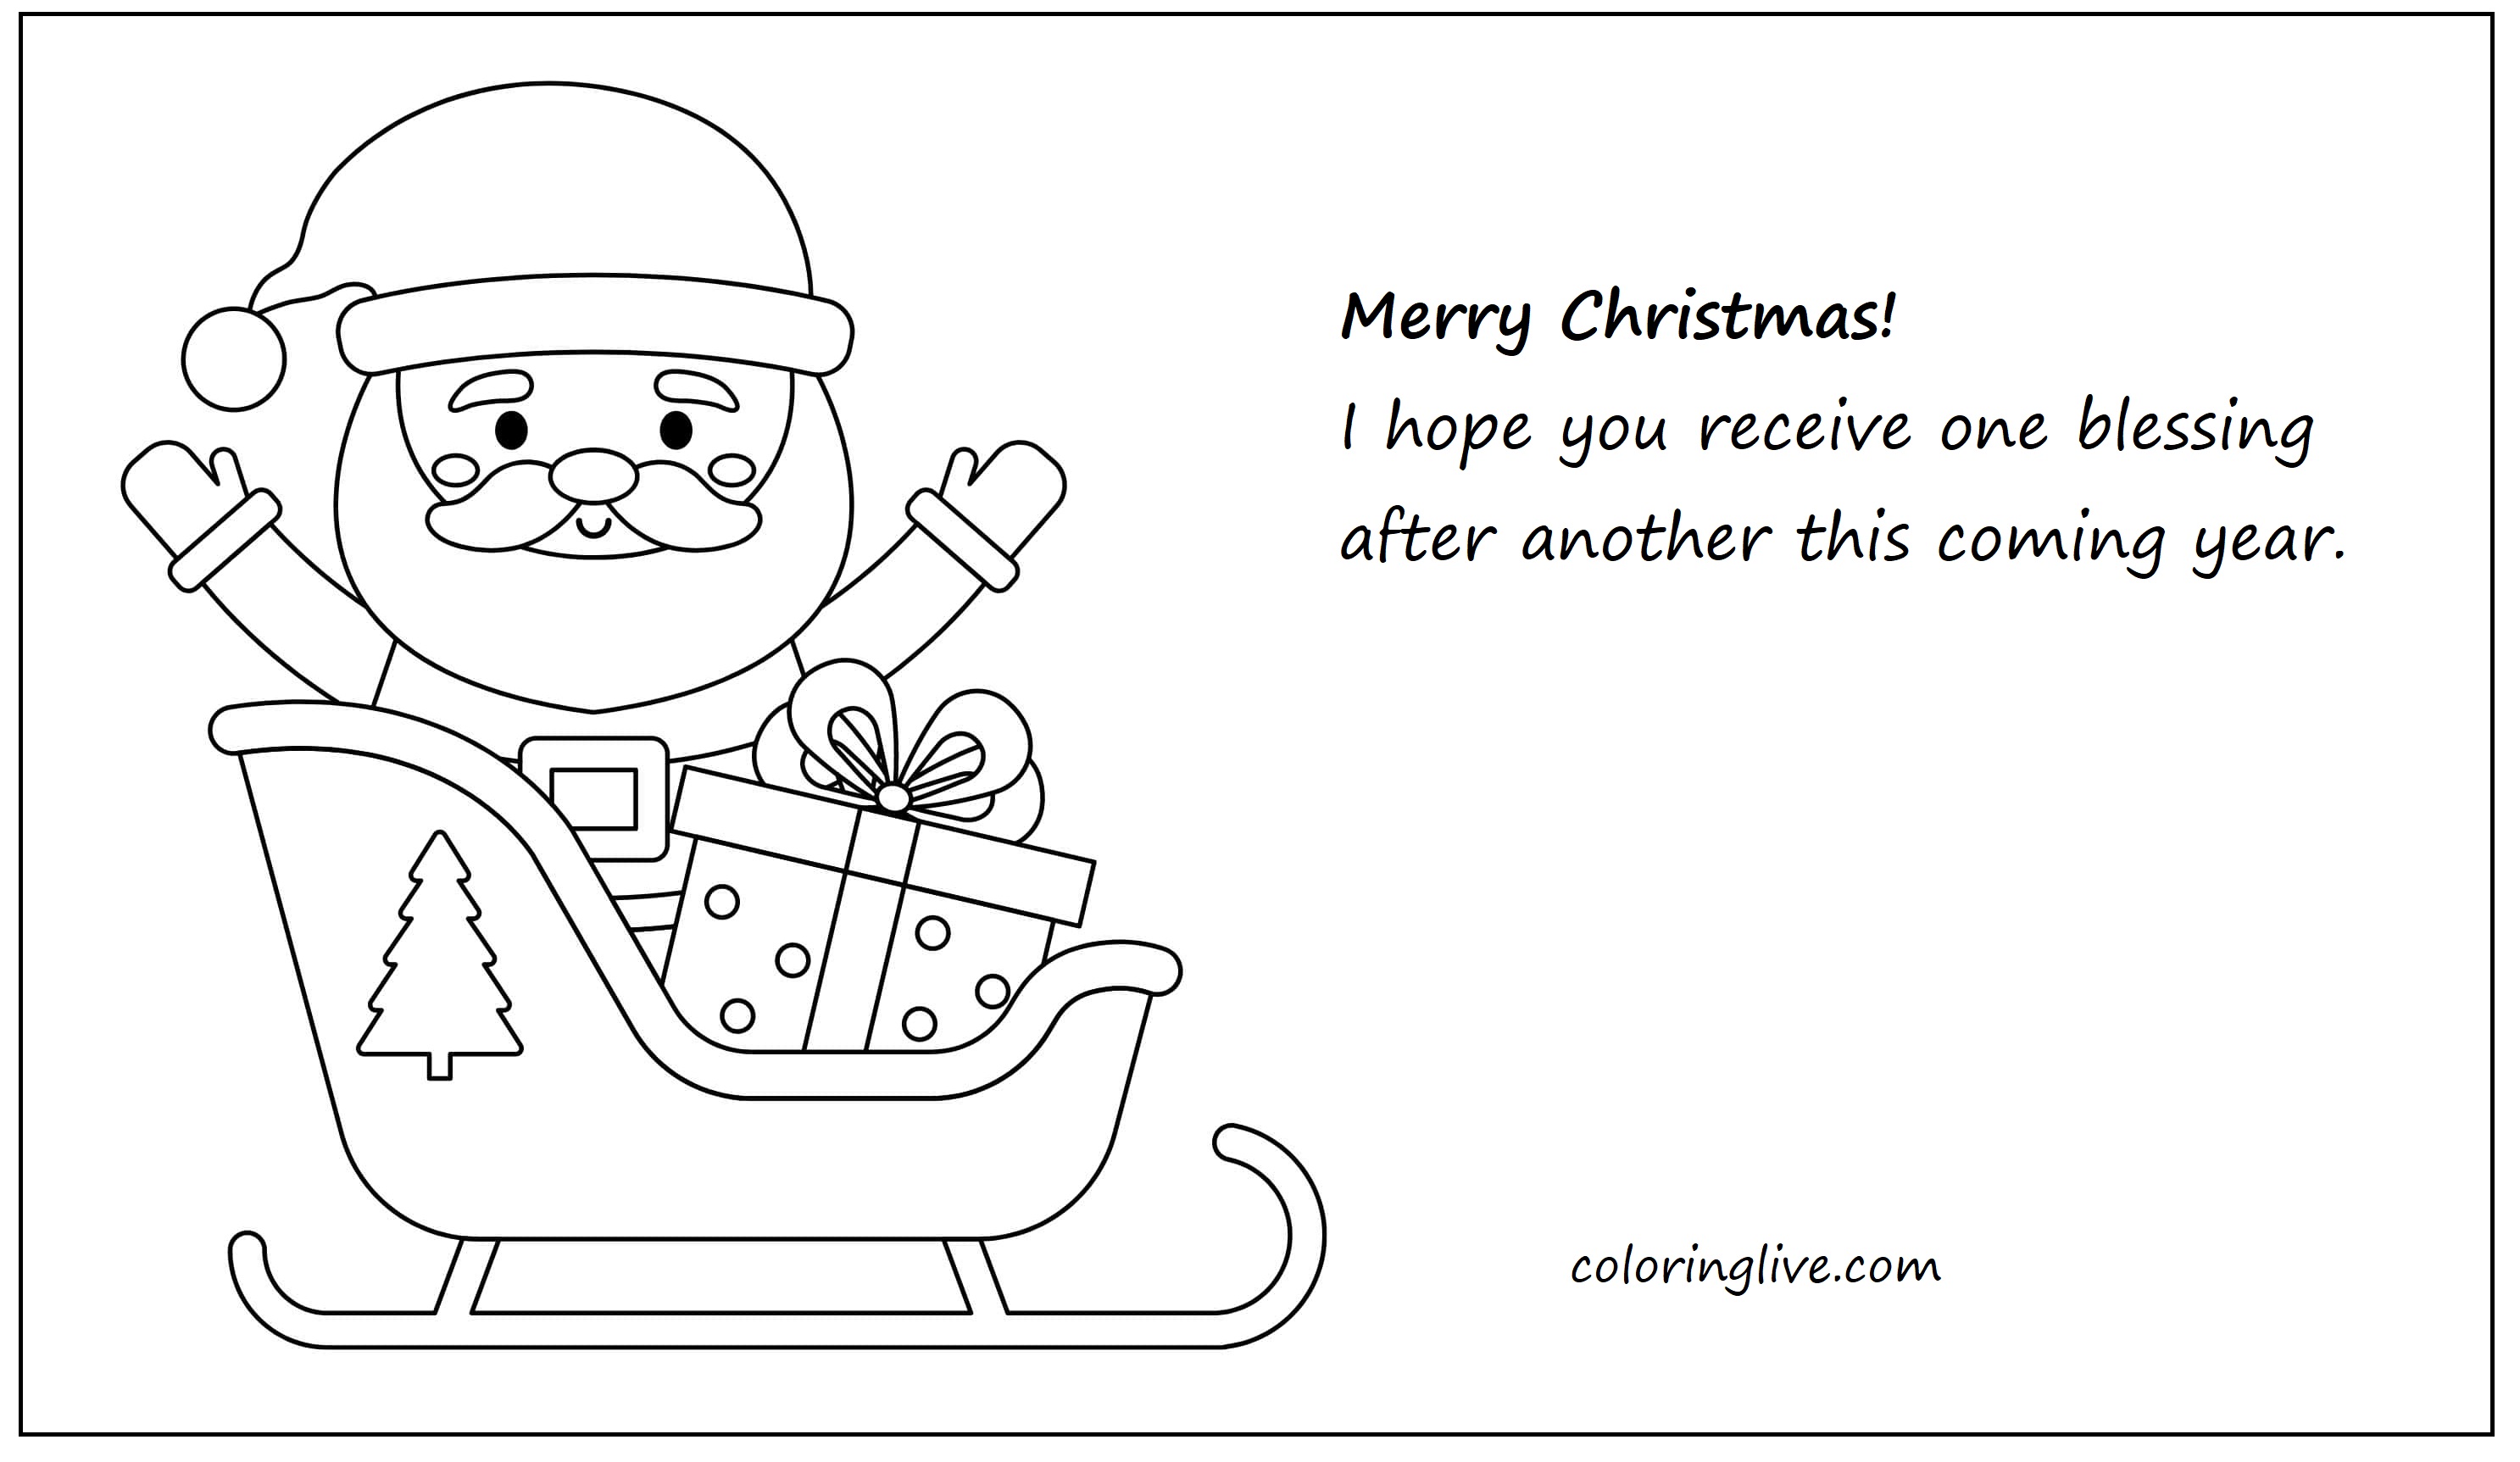 Printable Santa Claus wishing a merry christmas Coloring Page for kids.